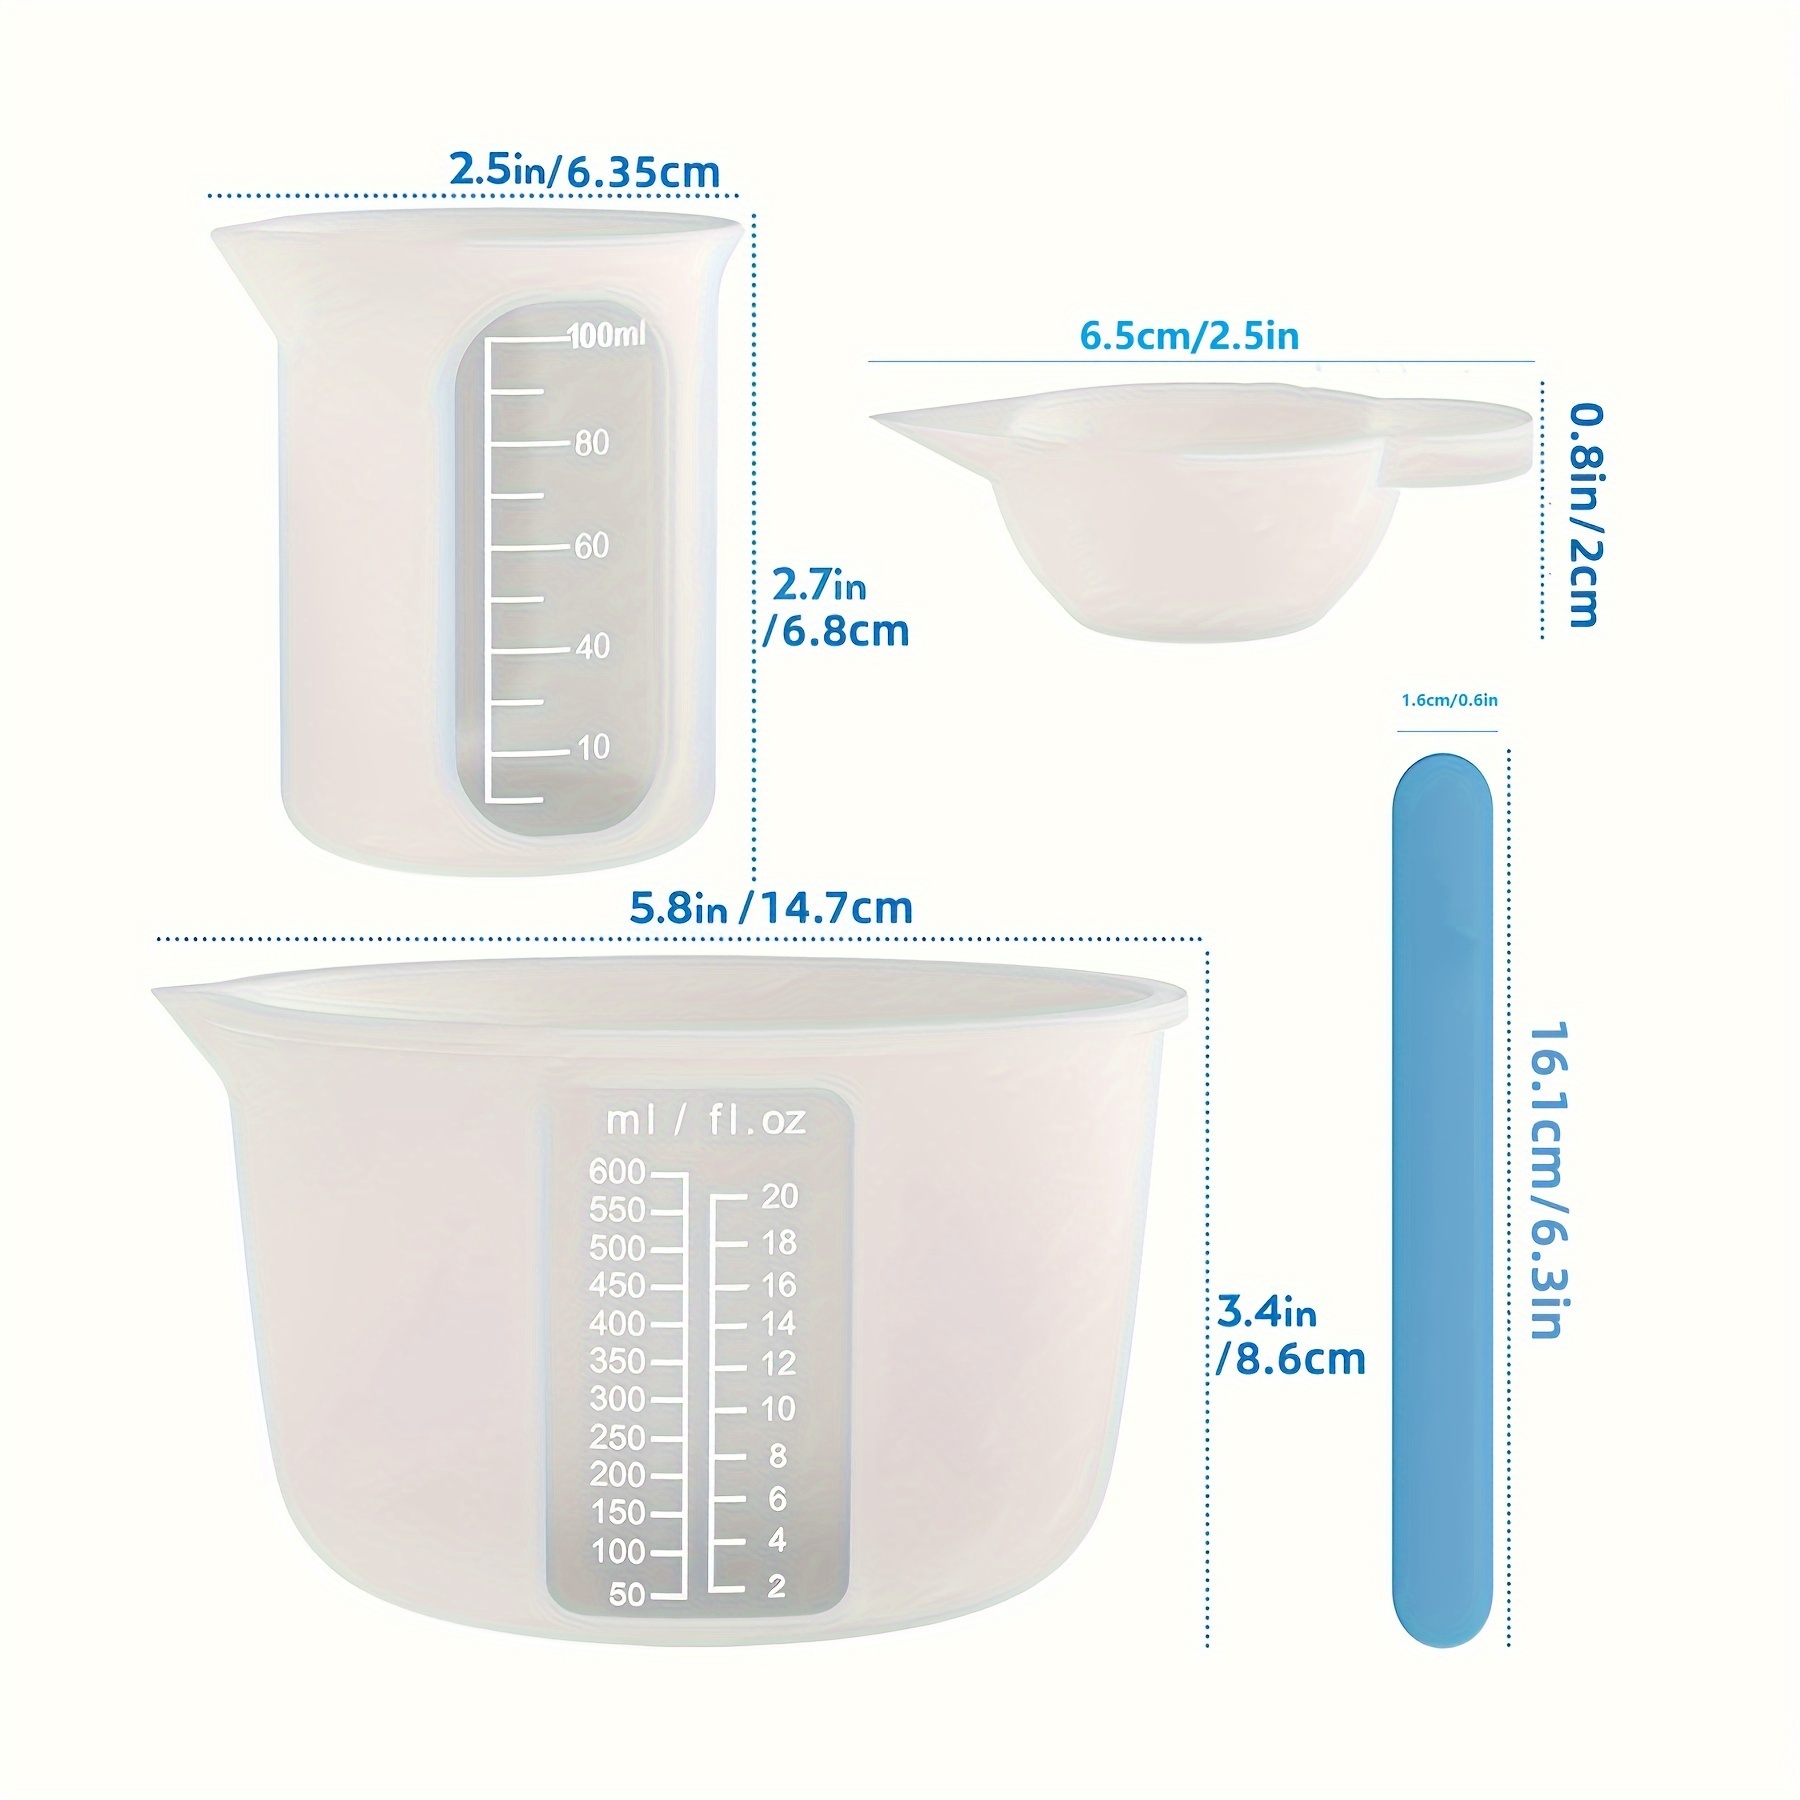 LICHENGTAI Silicone Resin Measuring Cups Tool Kit Large Epoxy Resin Mixing  Bowl Jewelry Making Waxing Mold with Silicone Stir Sticks Pipettes Finger  Cots Type 2 